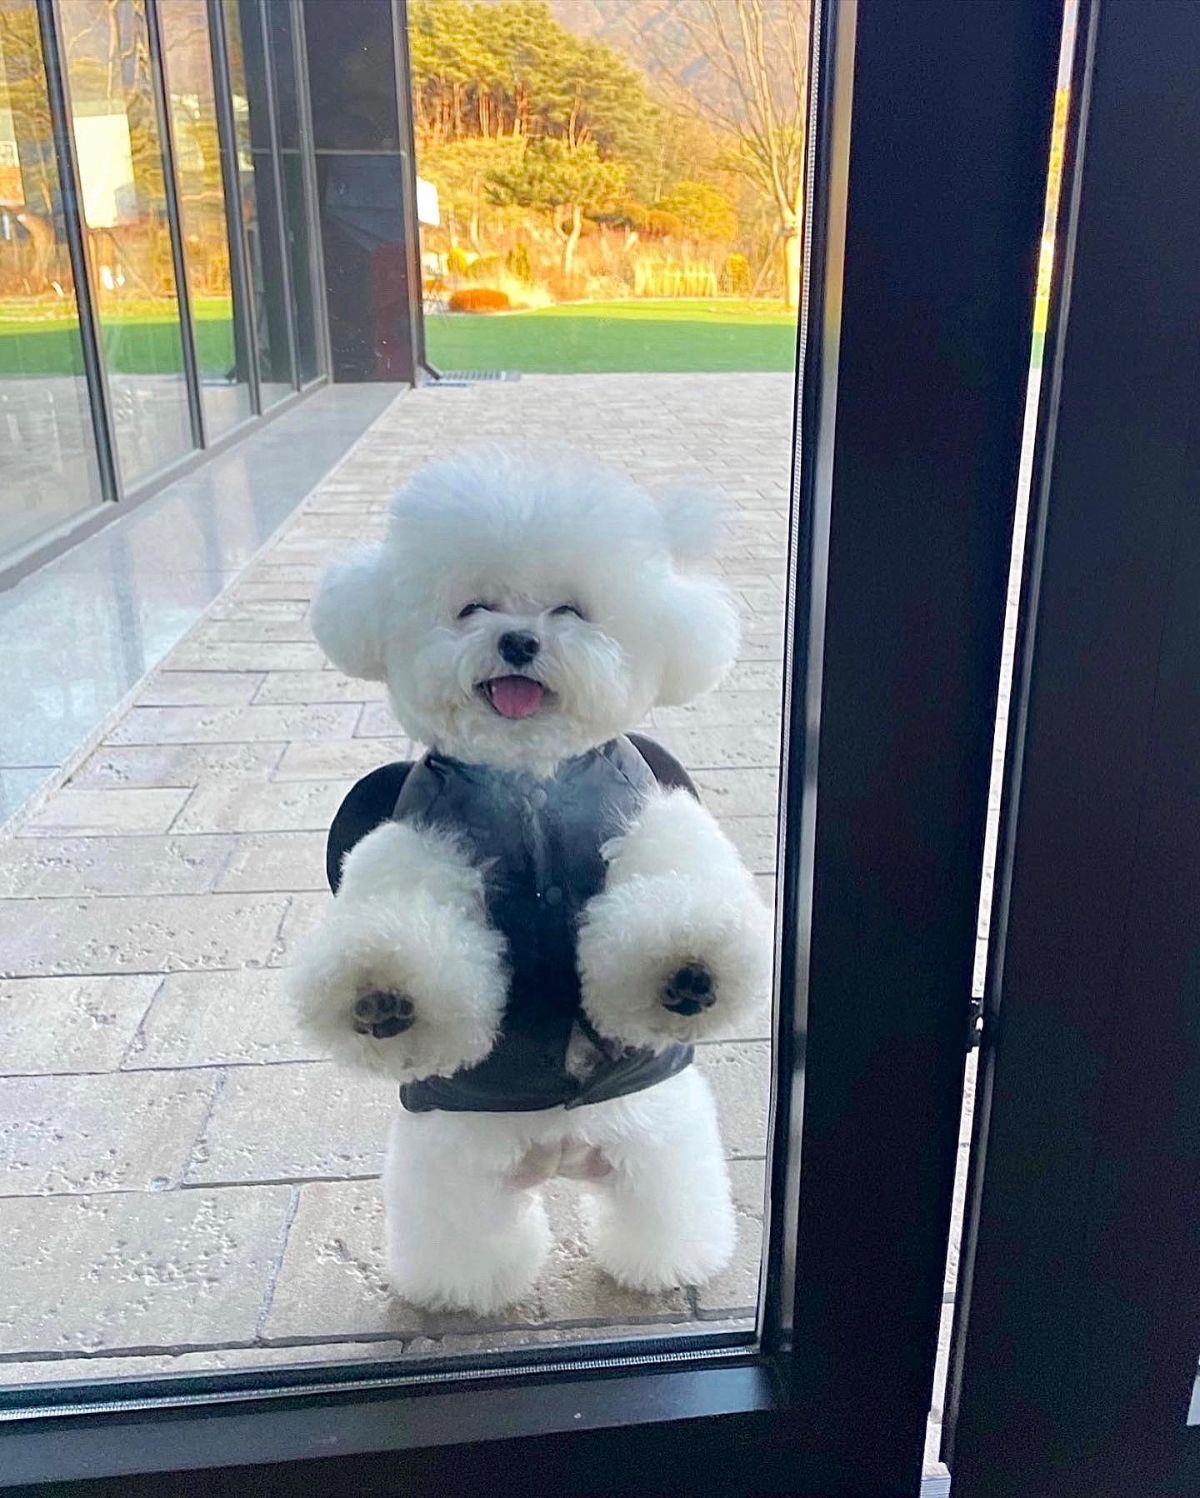 small fluffy white dog wearing a black jacket standing outside on hind legs with front paws on the glass door and looking in